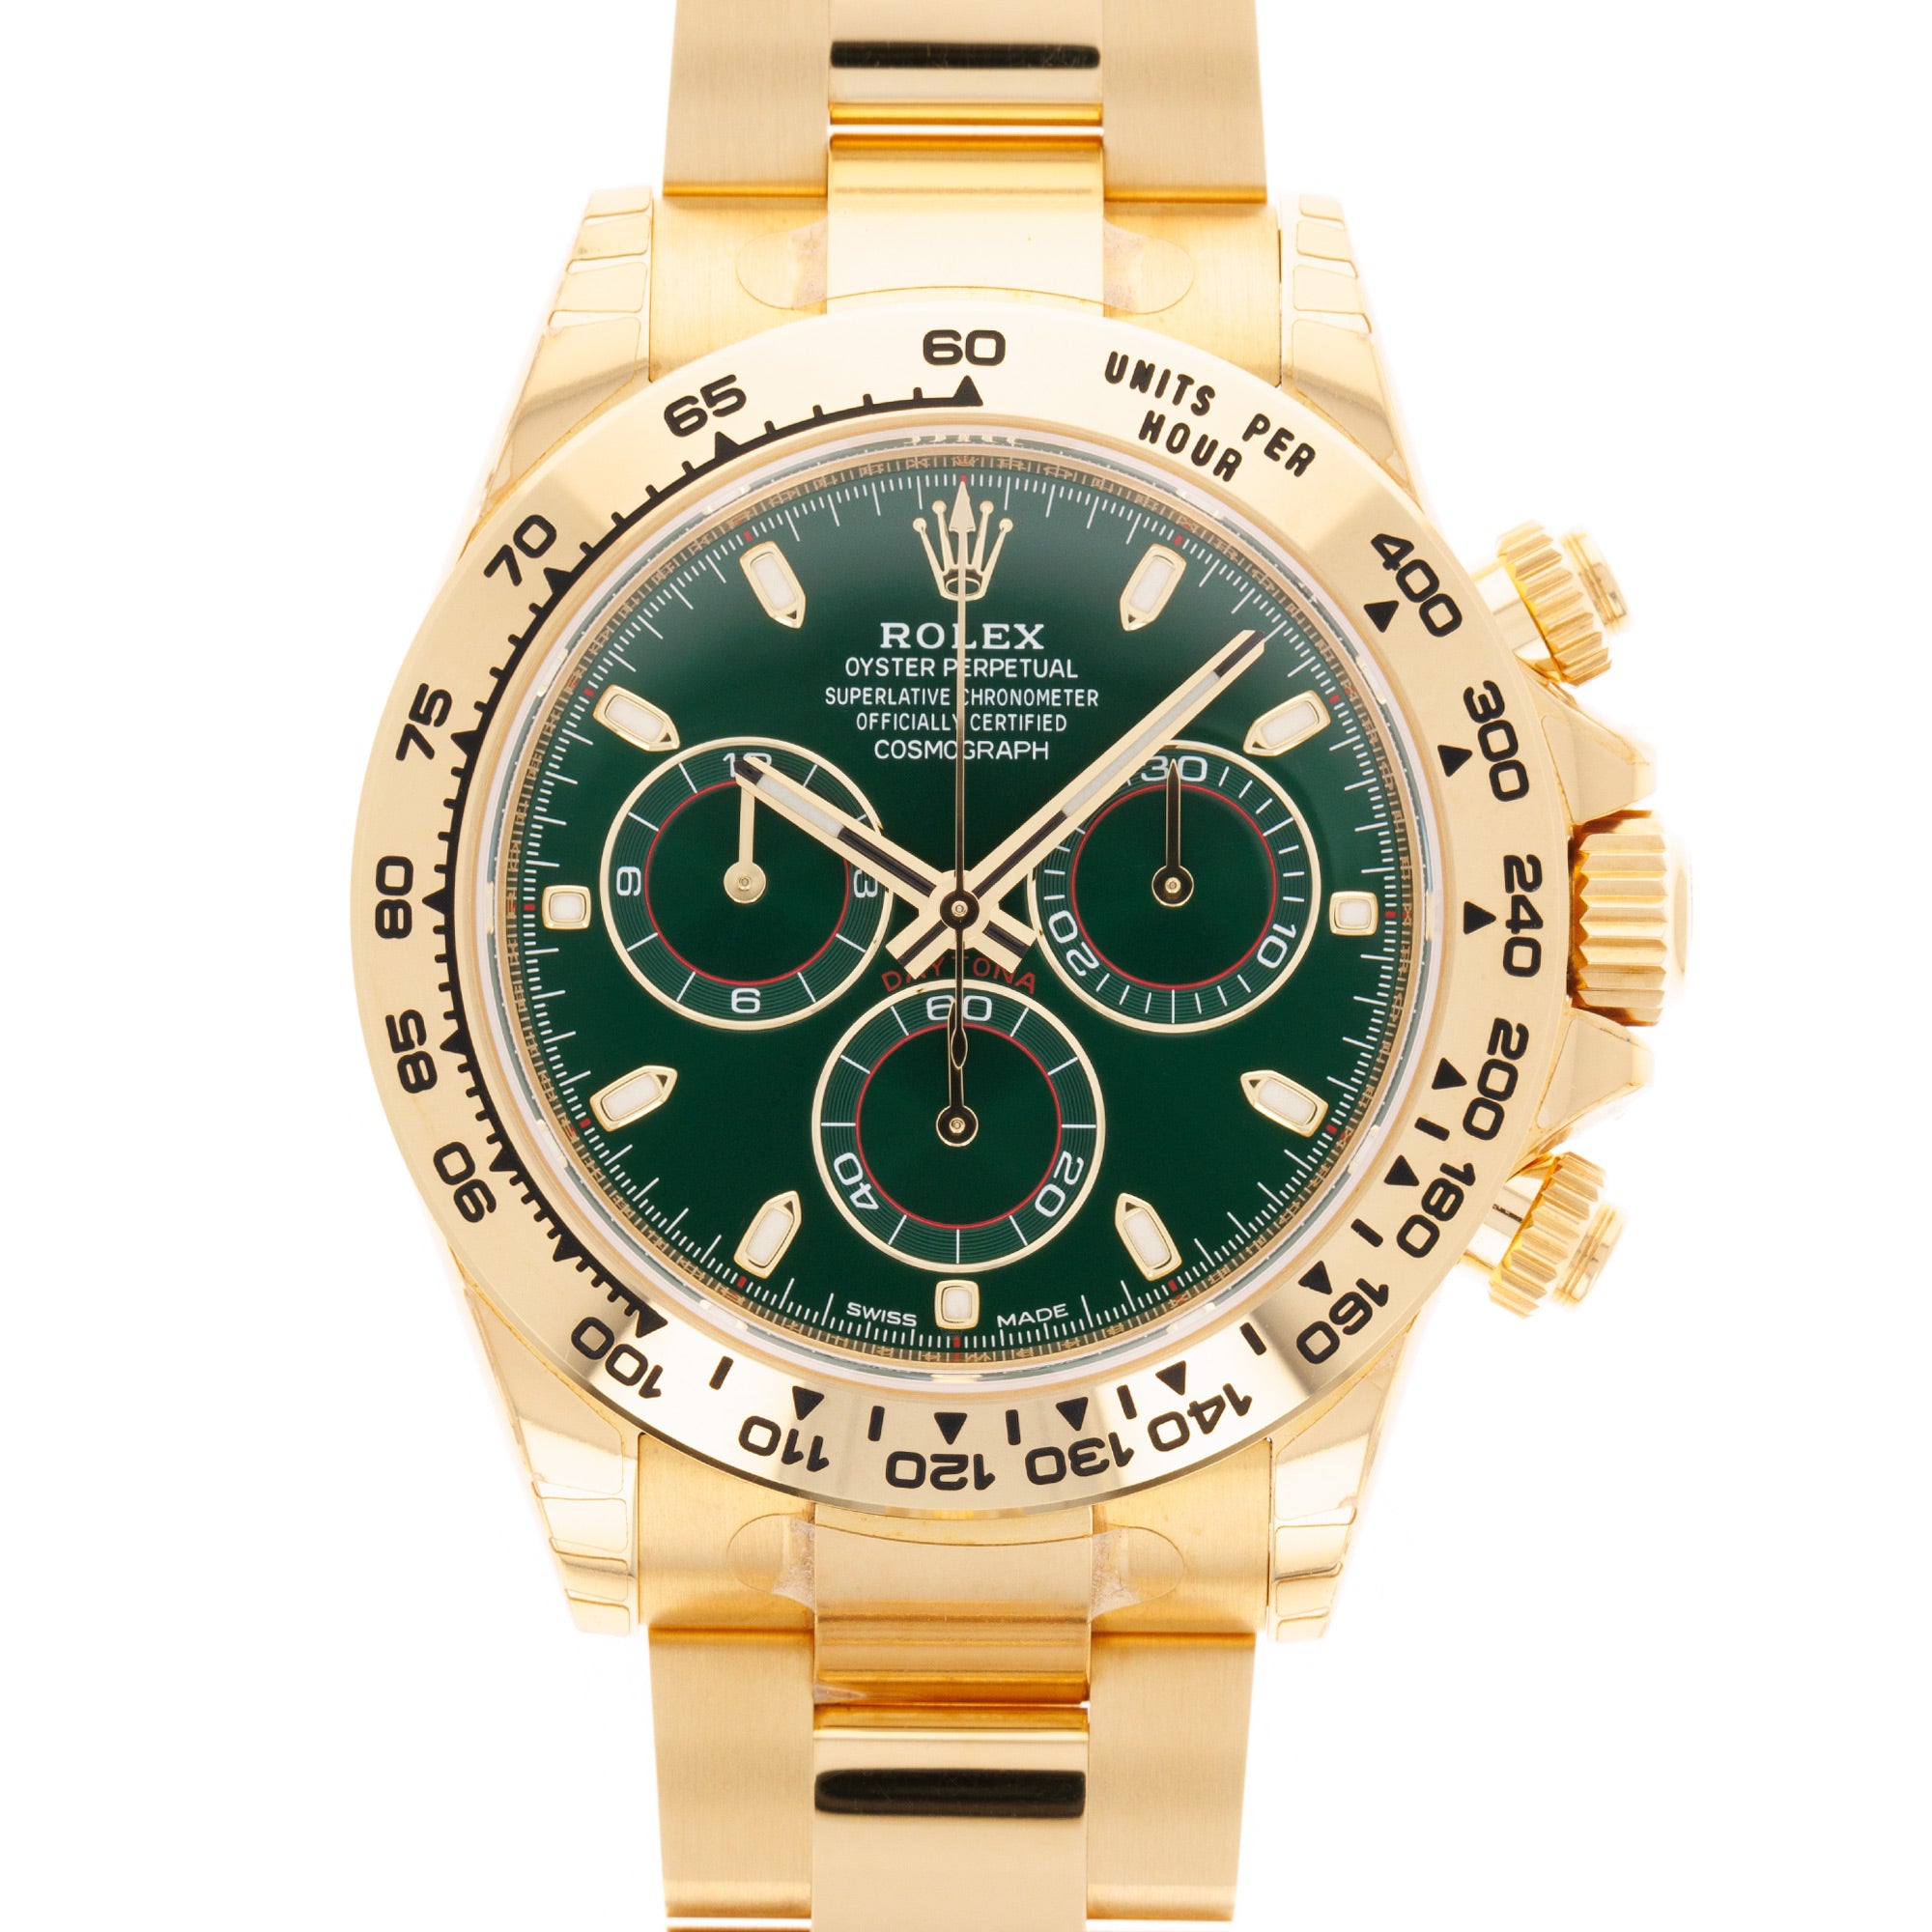 Rolex - Rolex Yellow Gold Daytona Ref. 116508 With Green Dial - The Keystone Watches